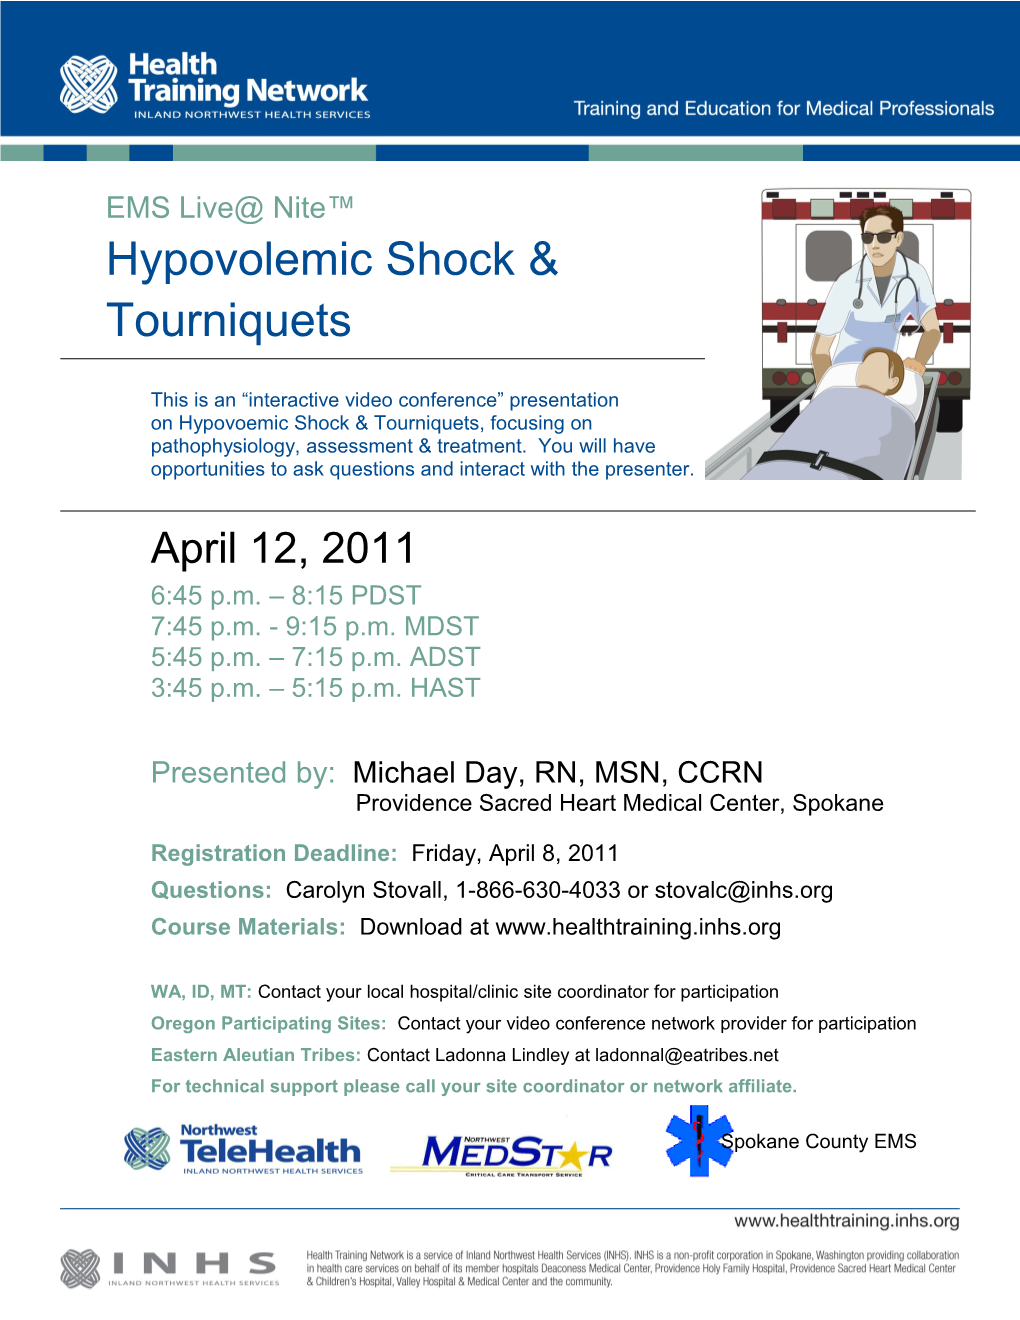 On Hypovoemic Shock & Tourniquets, Focusing On